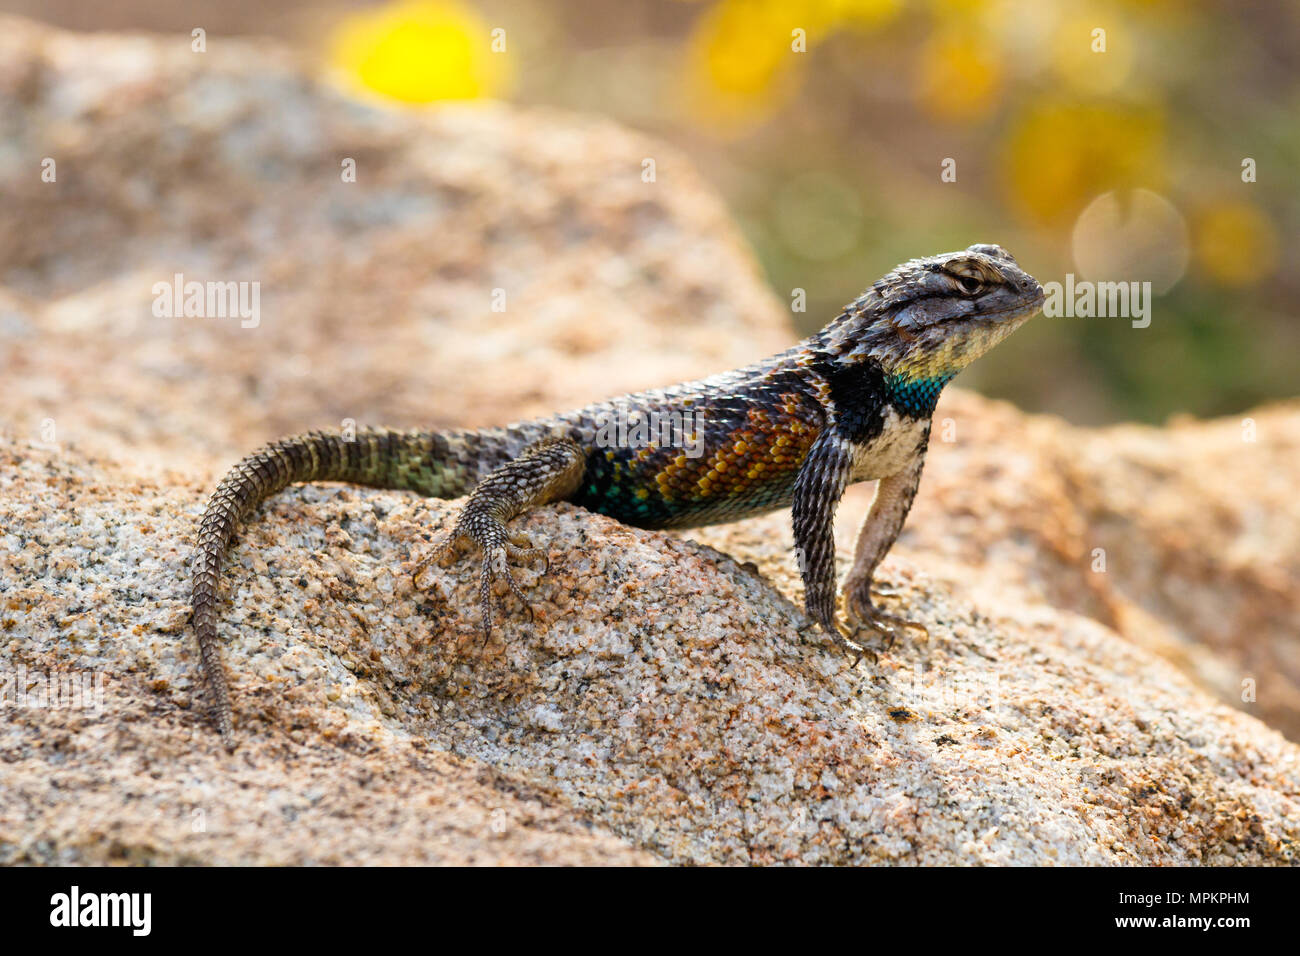 Desert Spiny Lizard (sceloporus magister) on a granite rock, with brightly colored scales, in Arizona's Sonoran desert. Stock Photo